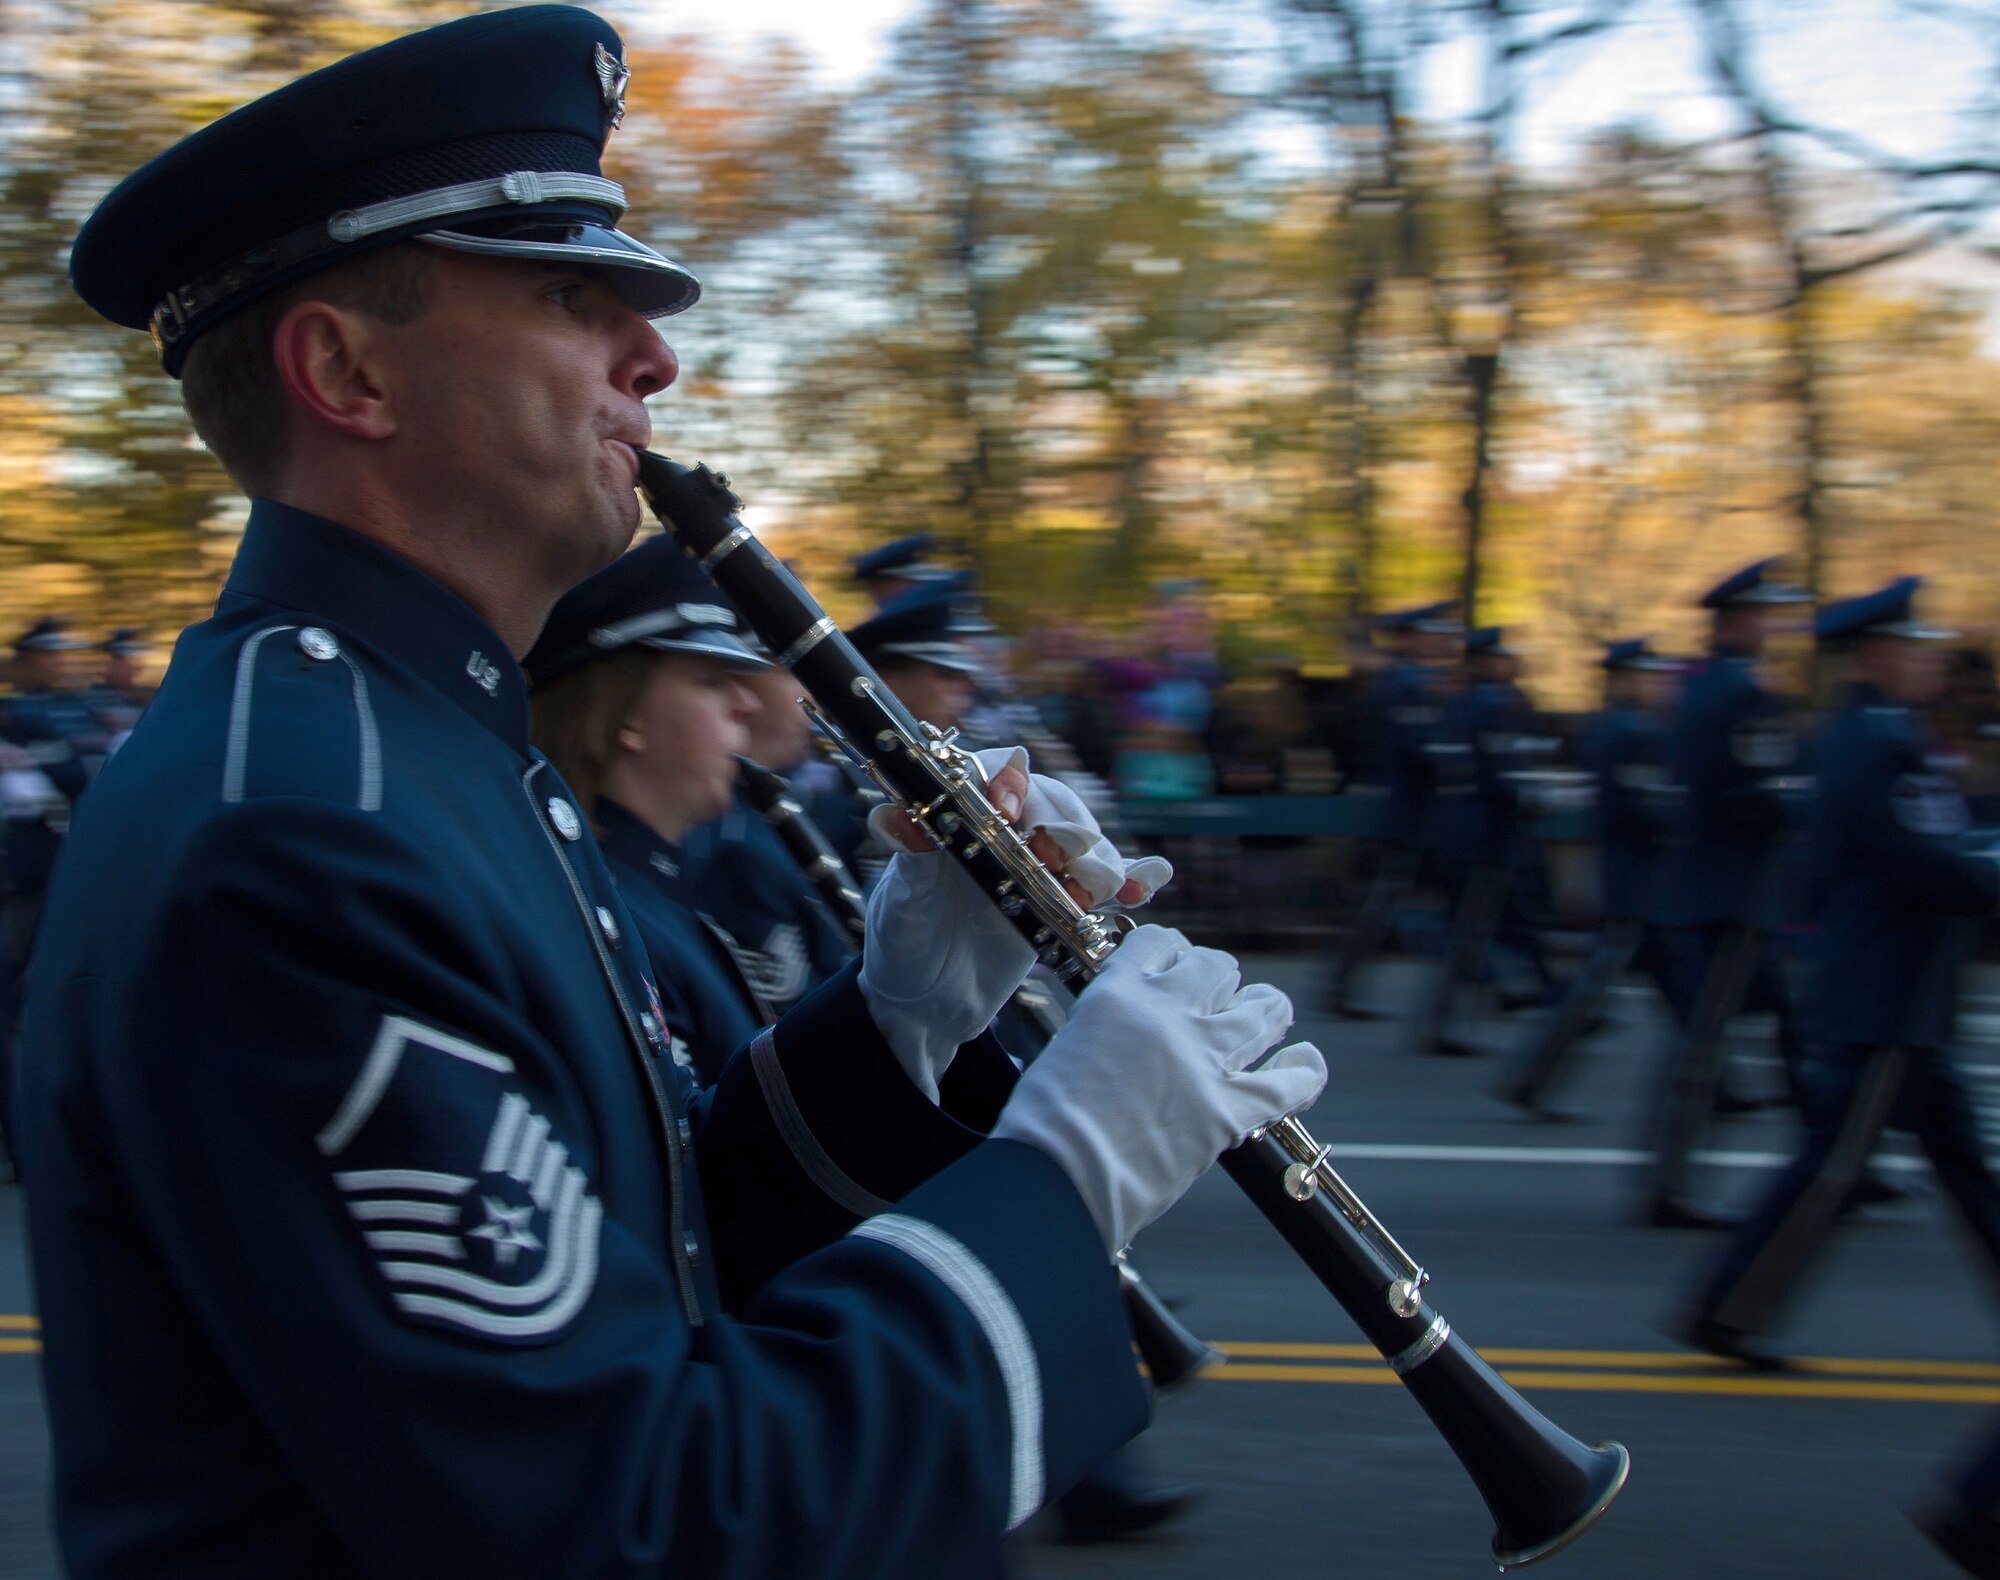 Master Sgt. Blake Aarington, U.S. Air Force Band clarinet player, performs with the band during the 86th Annual Macy's Thanksgiving Day Parade, Nov. 22, 2012, in New York City. Two hundred Airmen from the USAF Band and Honor Guard marched in the parade with a televised audience of 55 million viewers. (U.S. Air Force photo by Senior Airman Perry Aston)